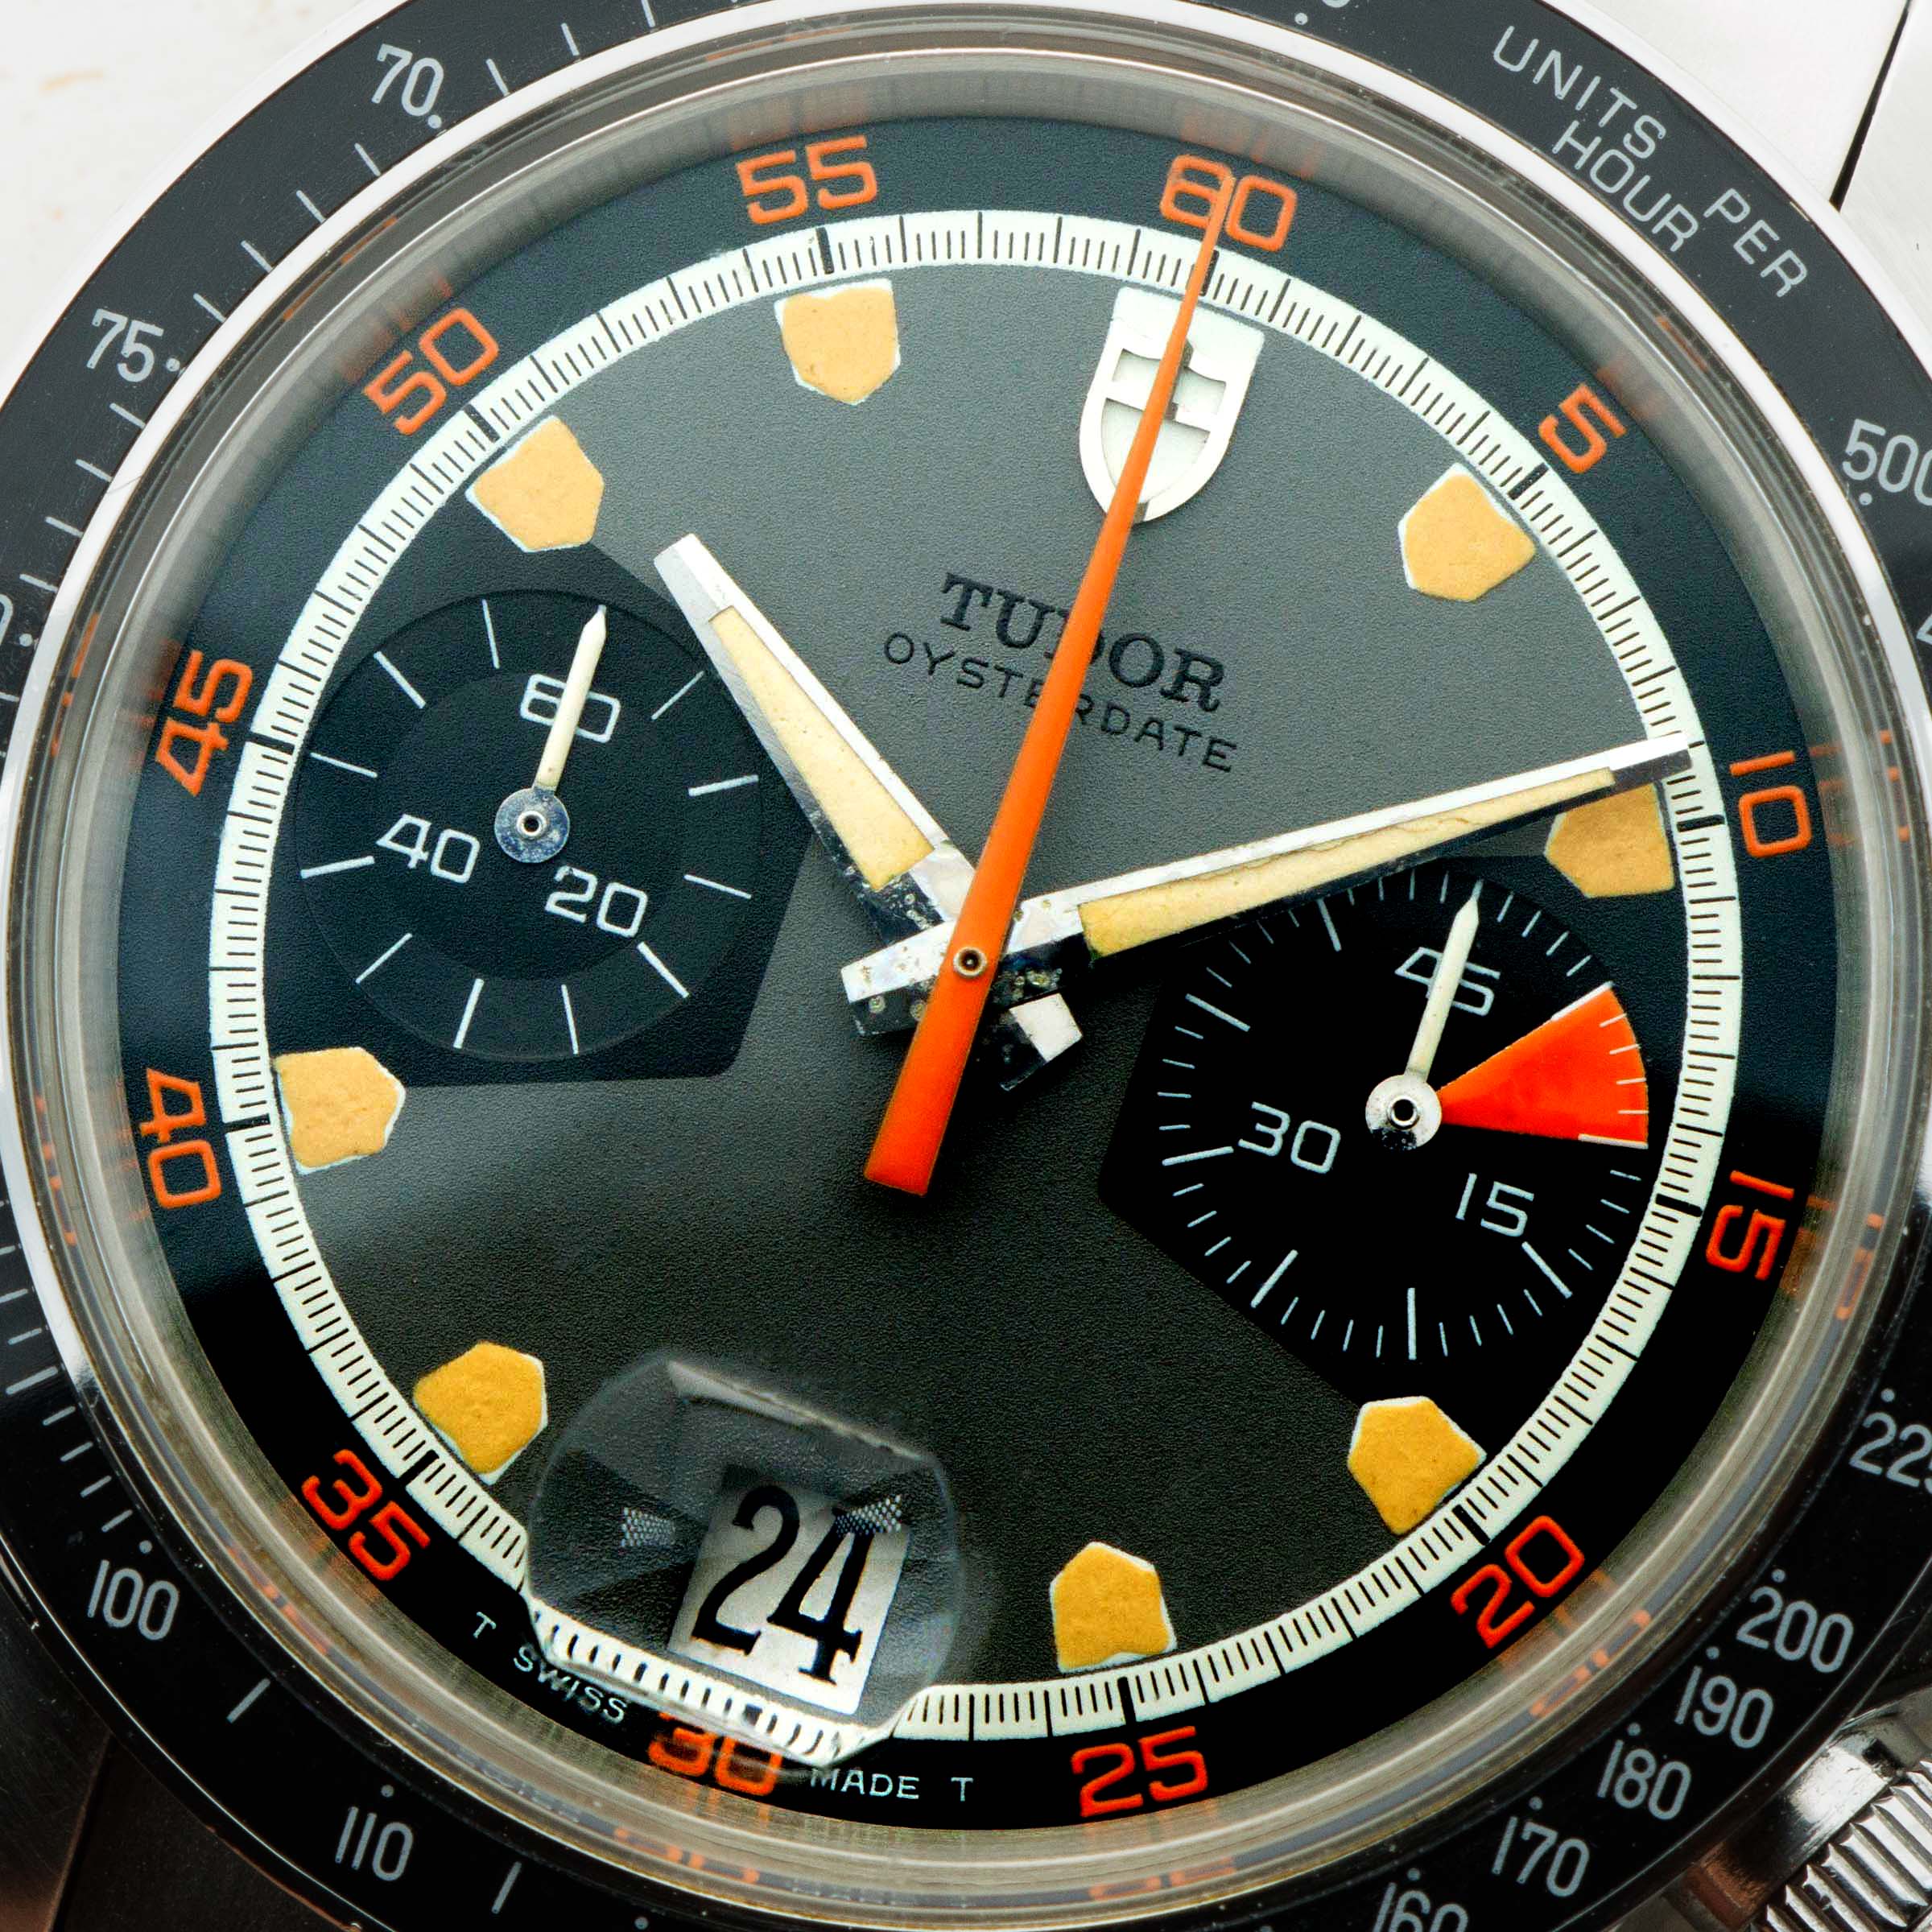 Tudor Home Plate Chrongraph 7031 | Auctions | Loupe This